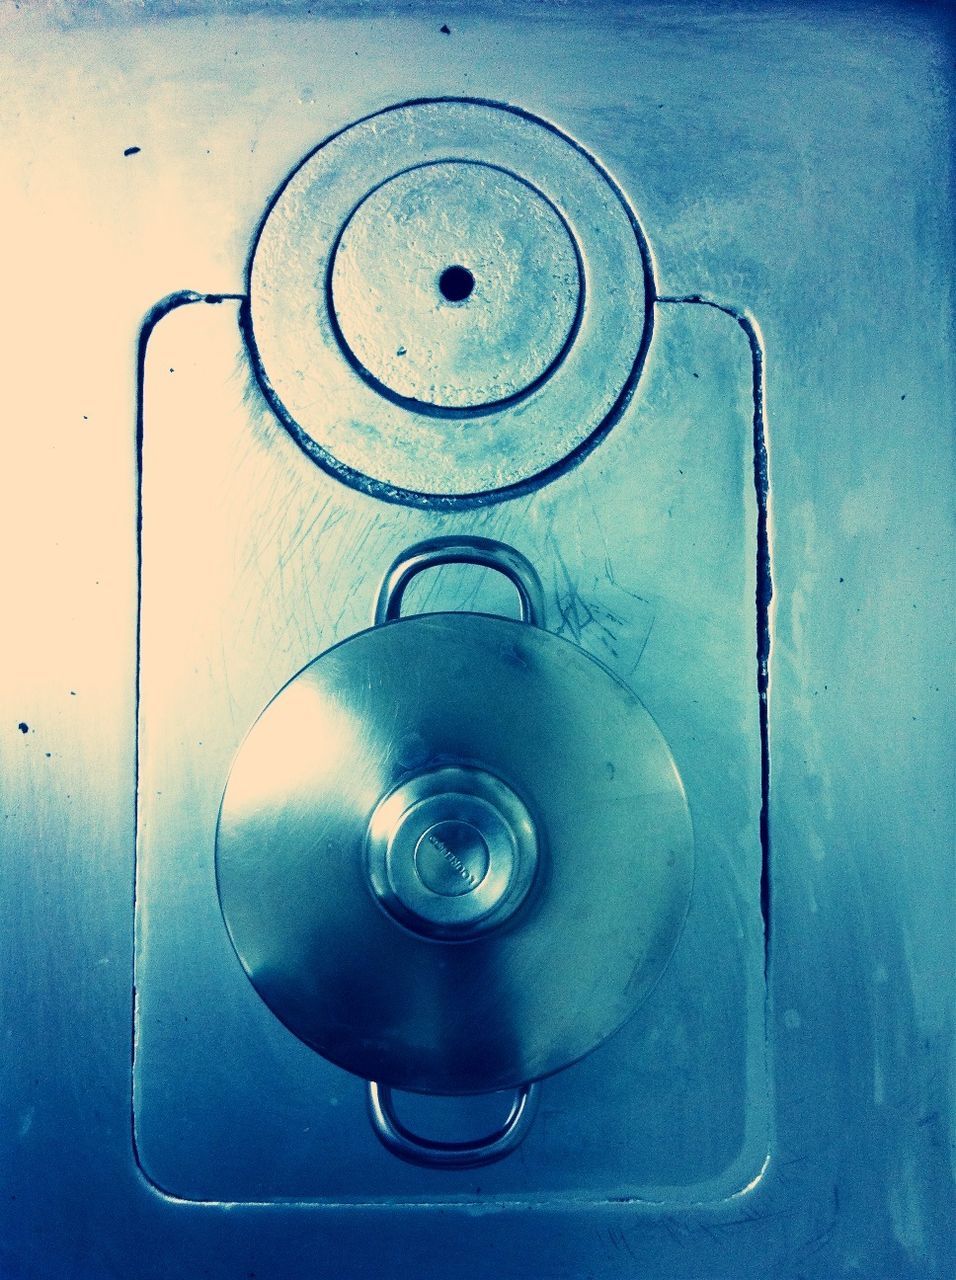 indoors, metal, close-up, electricity, technology, metallic, old-fashioned, wall - building feature, old, sink, no people, still life, retro styled, fuel and power generation, connection, lighting equipment, door, equipment, handle, high angle view